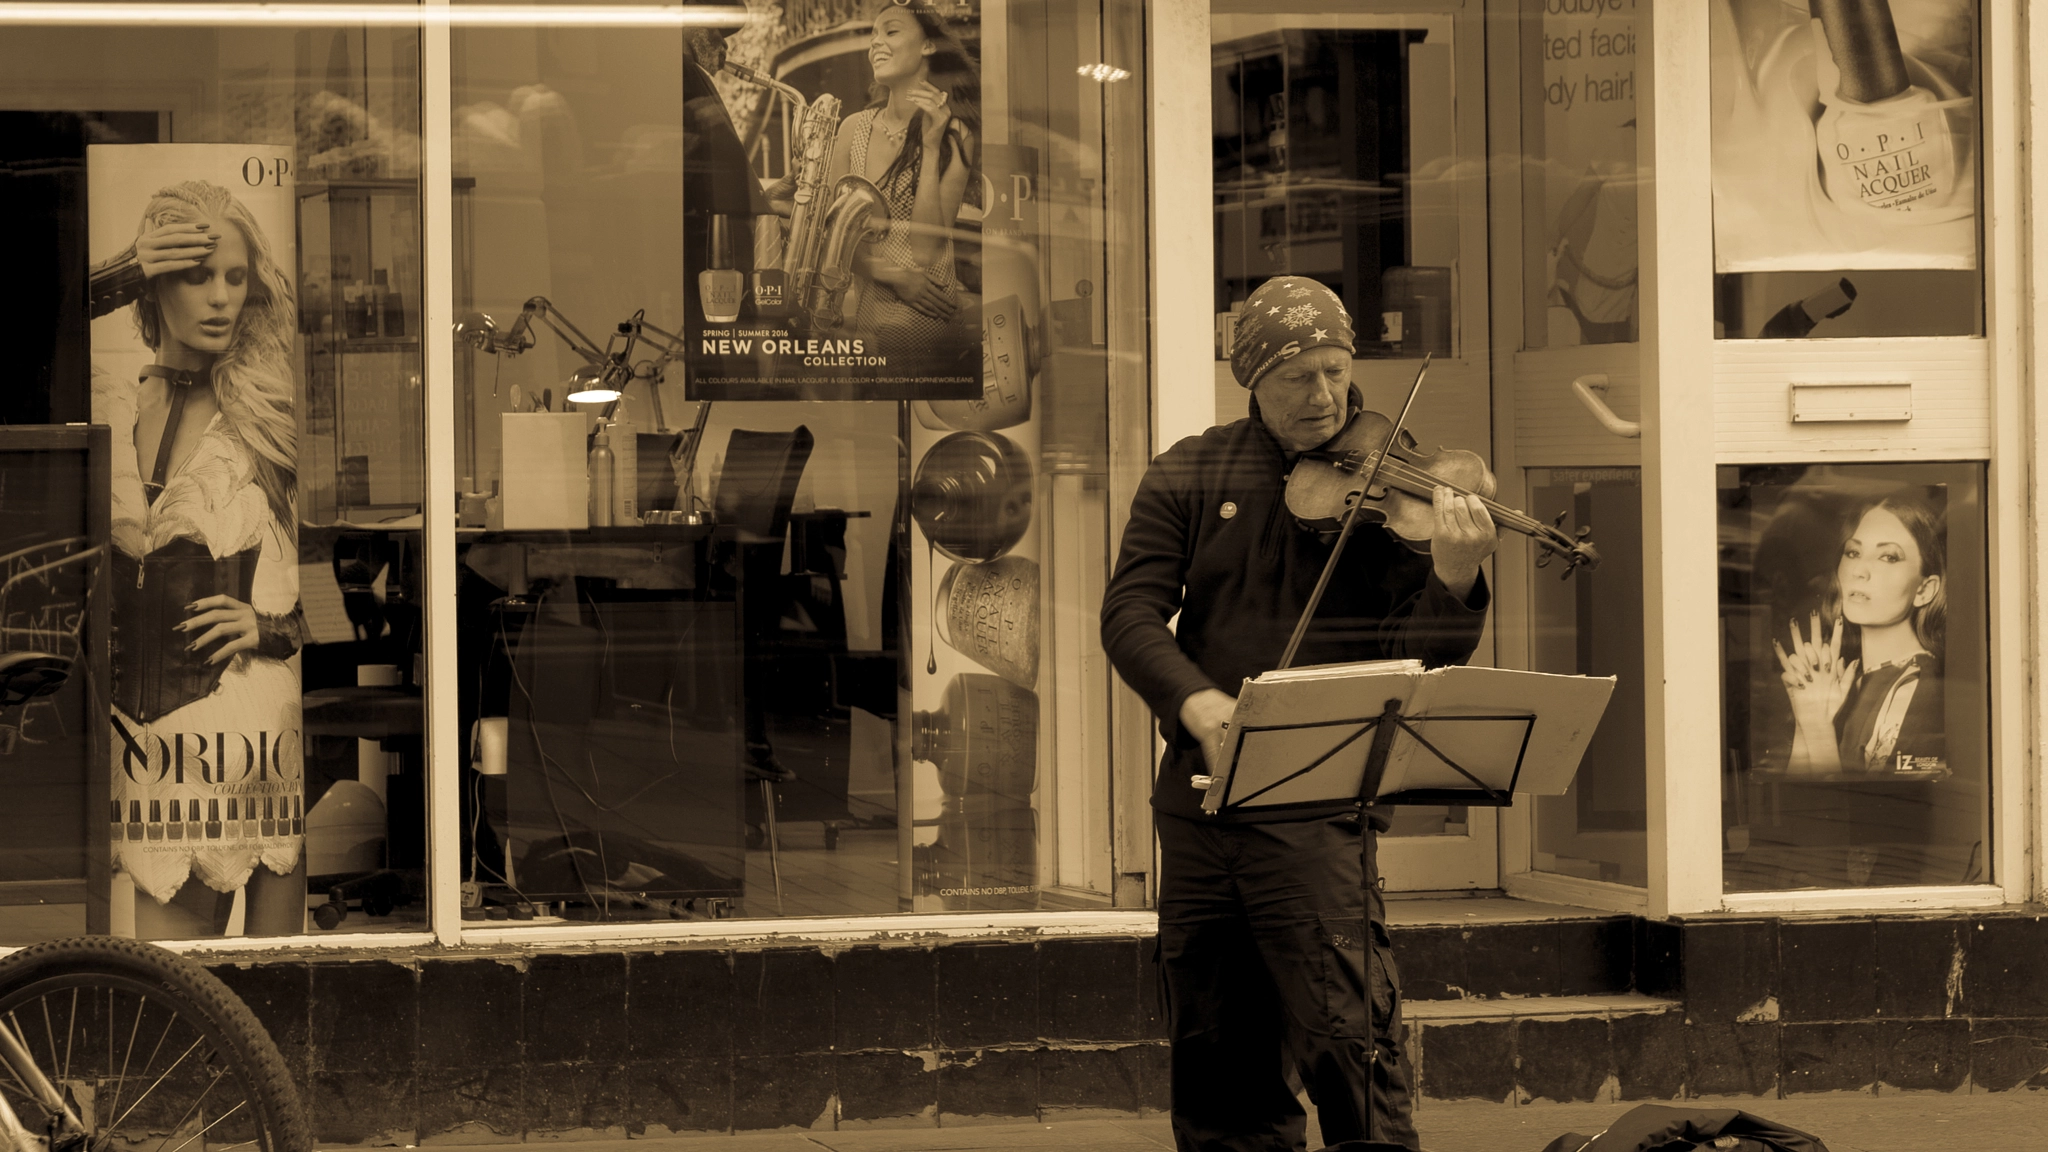 Sony a7 sample photo. Inverness busker photography